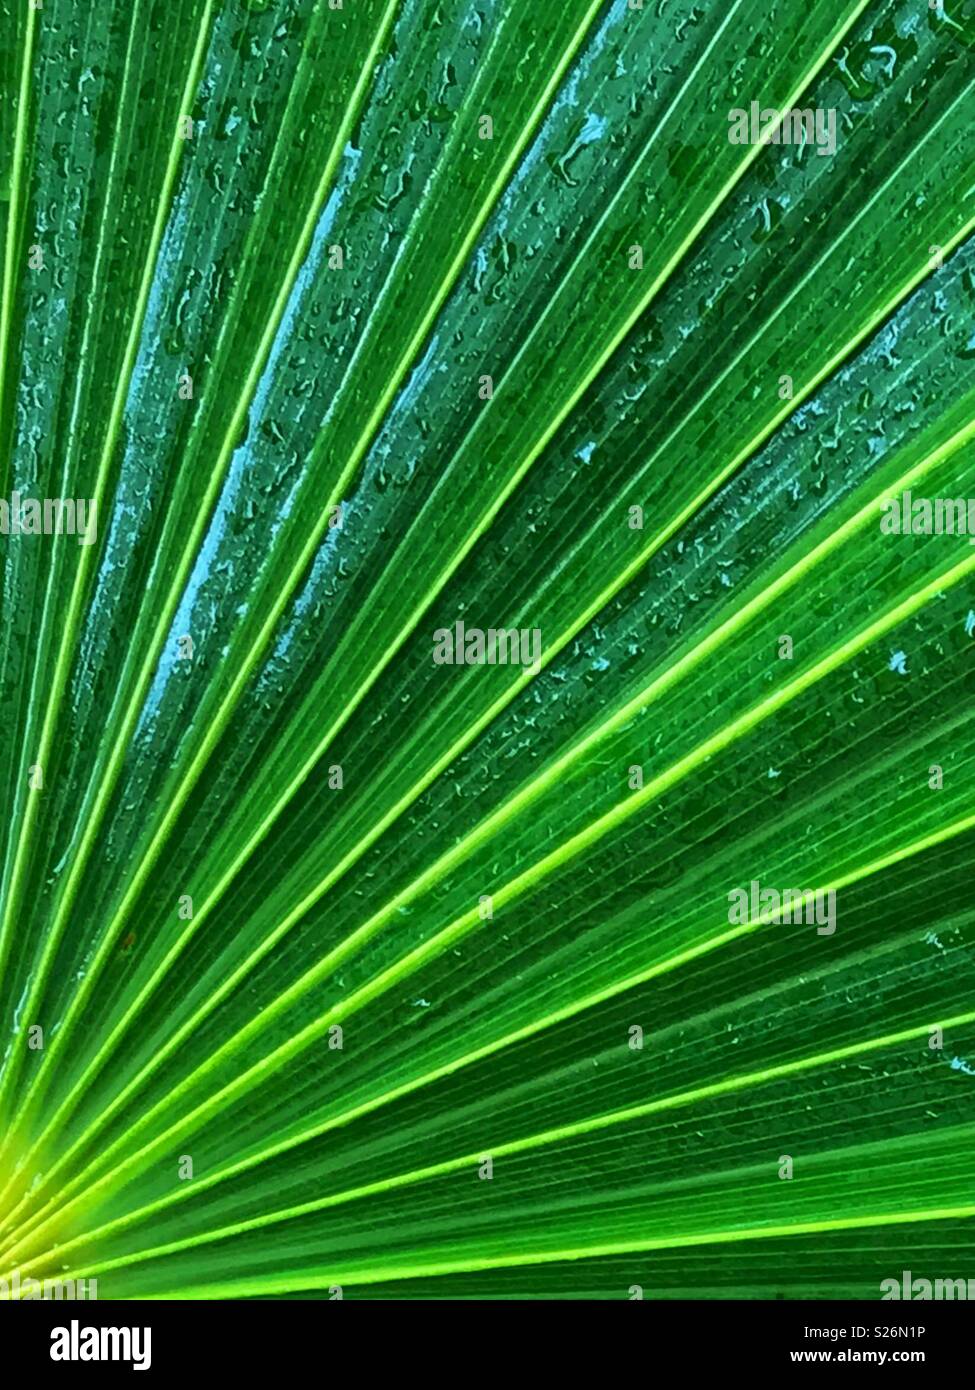 Vibrant stripey palm leaf with raindrops. Stock Photo